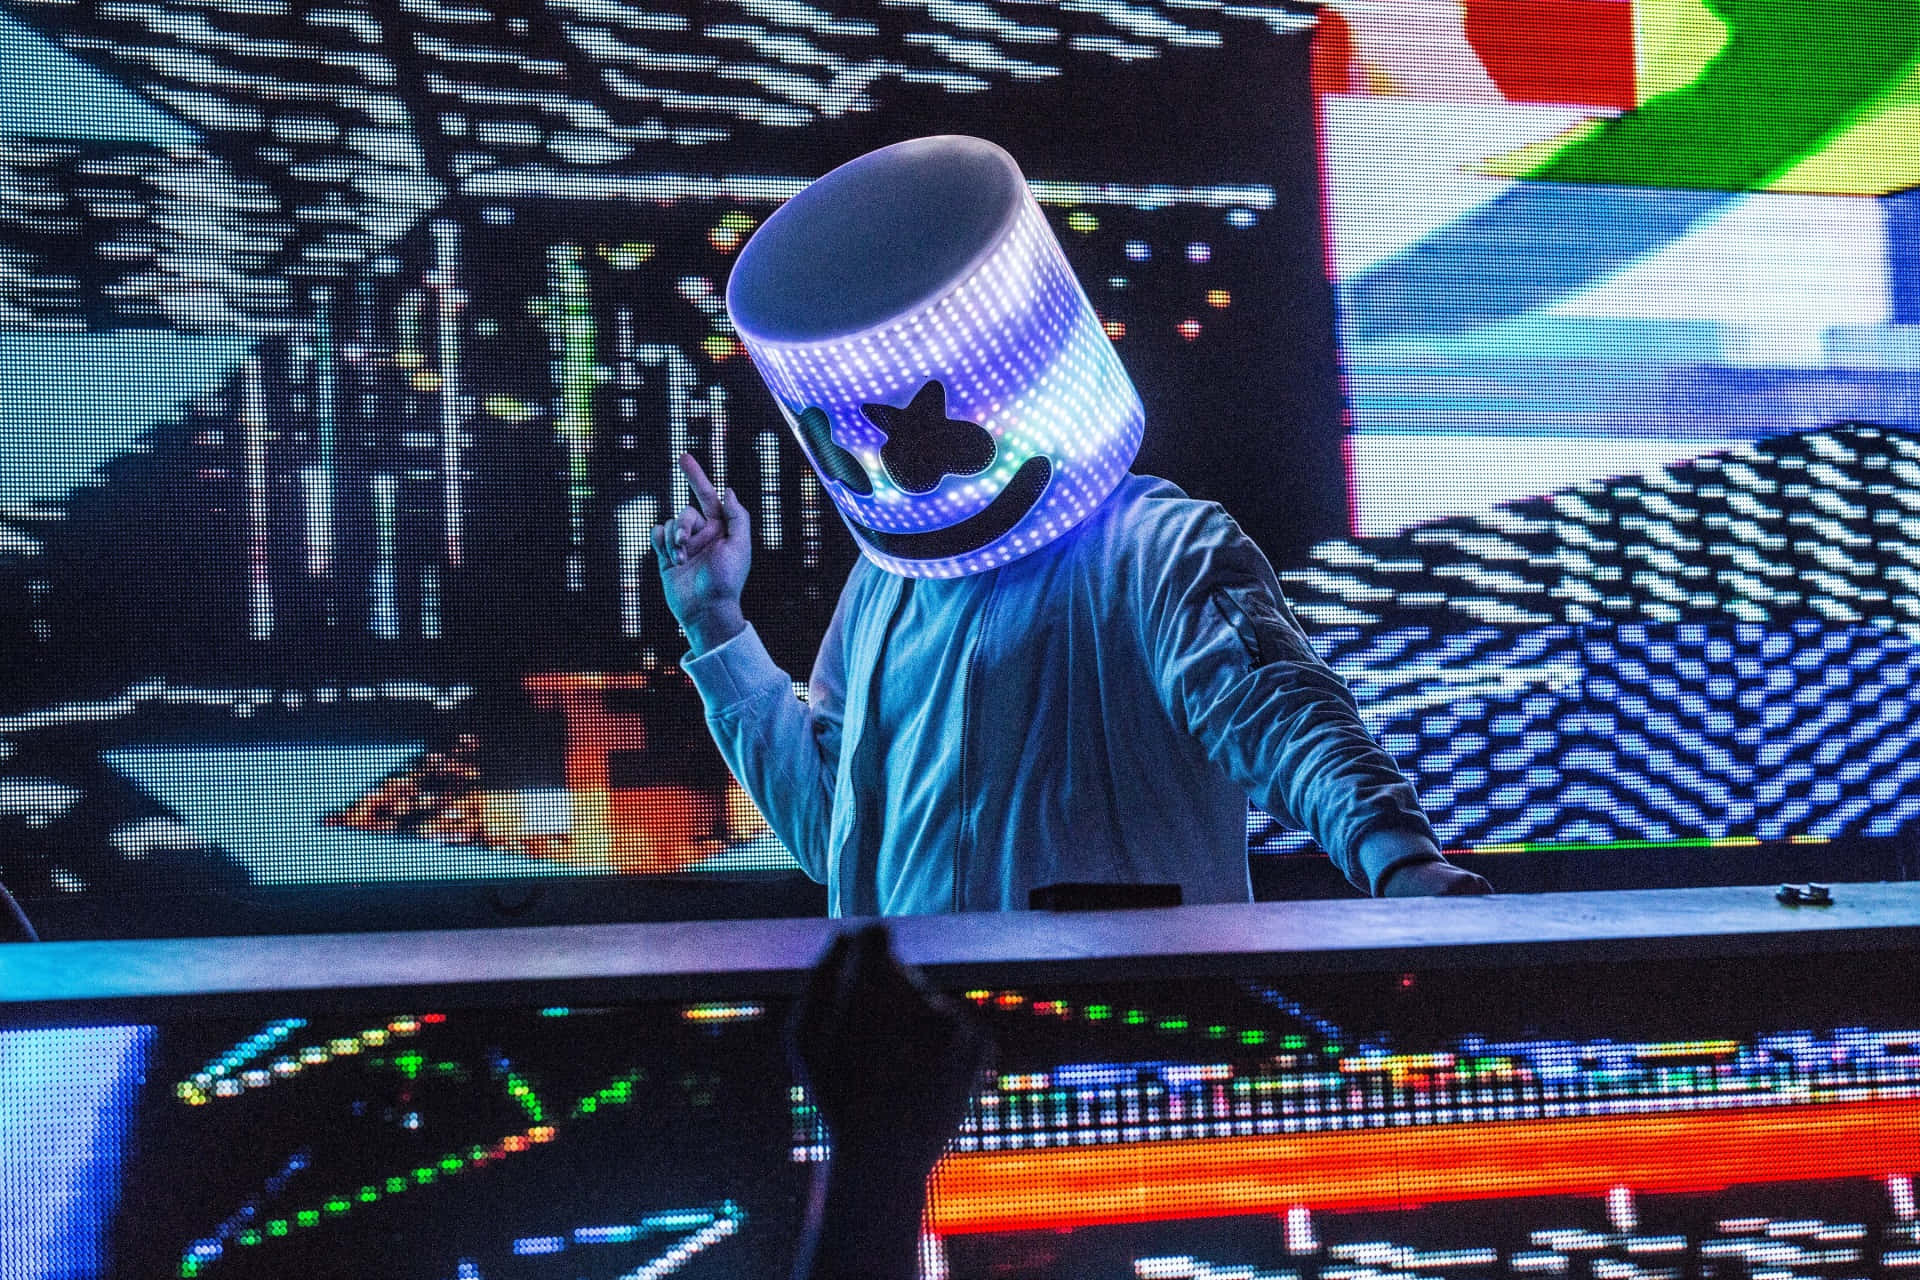 Feel the music, one Marshmello at a time